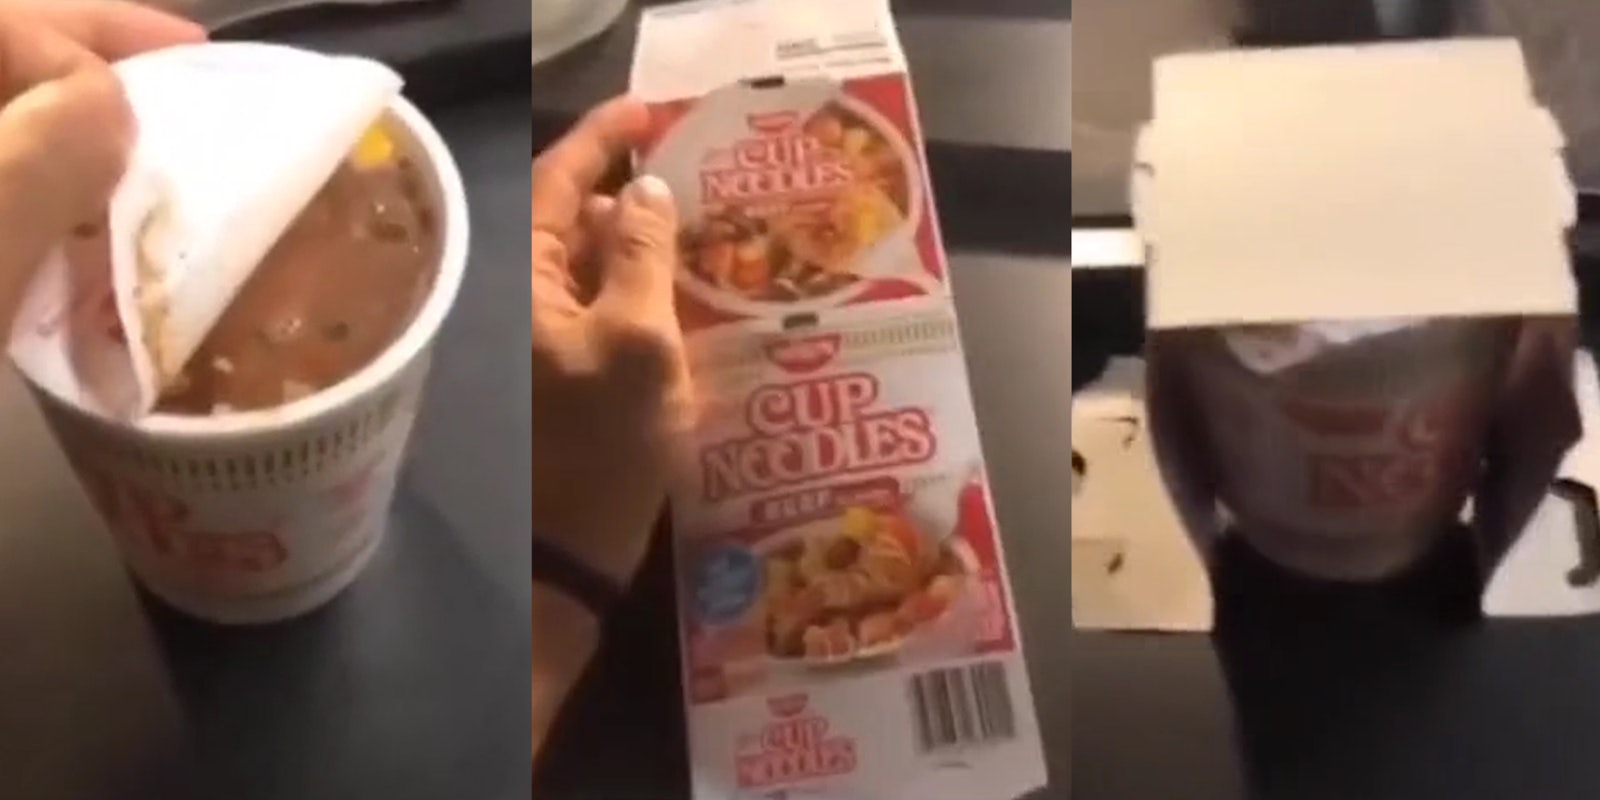 Cup Noodles on table (l) Cup Noodles packaging on table (c) Cup Noodles on table with packaging on top (r)